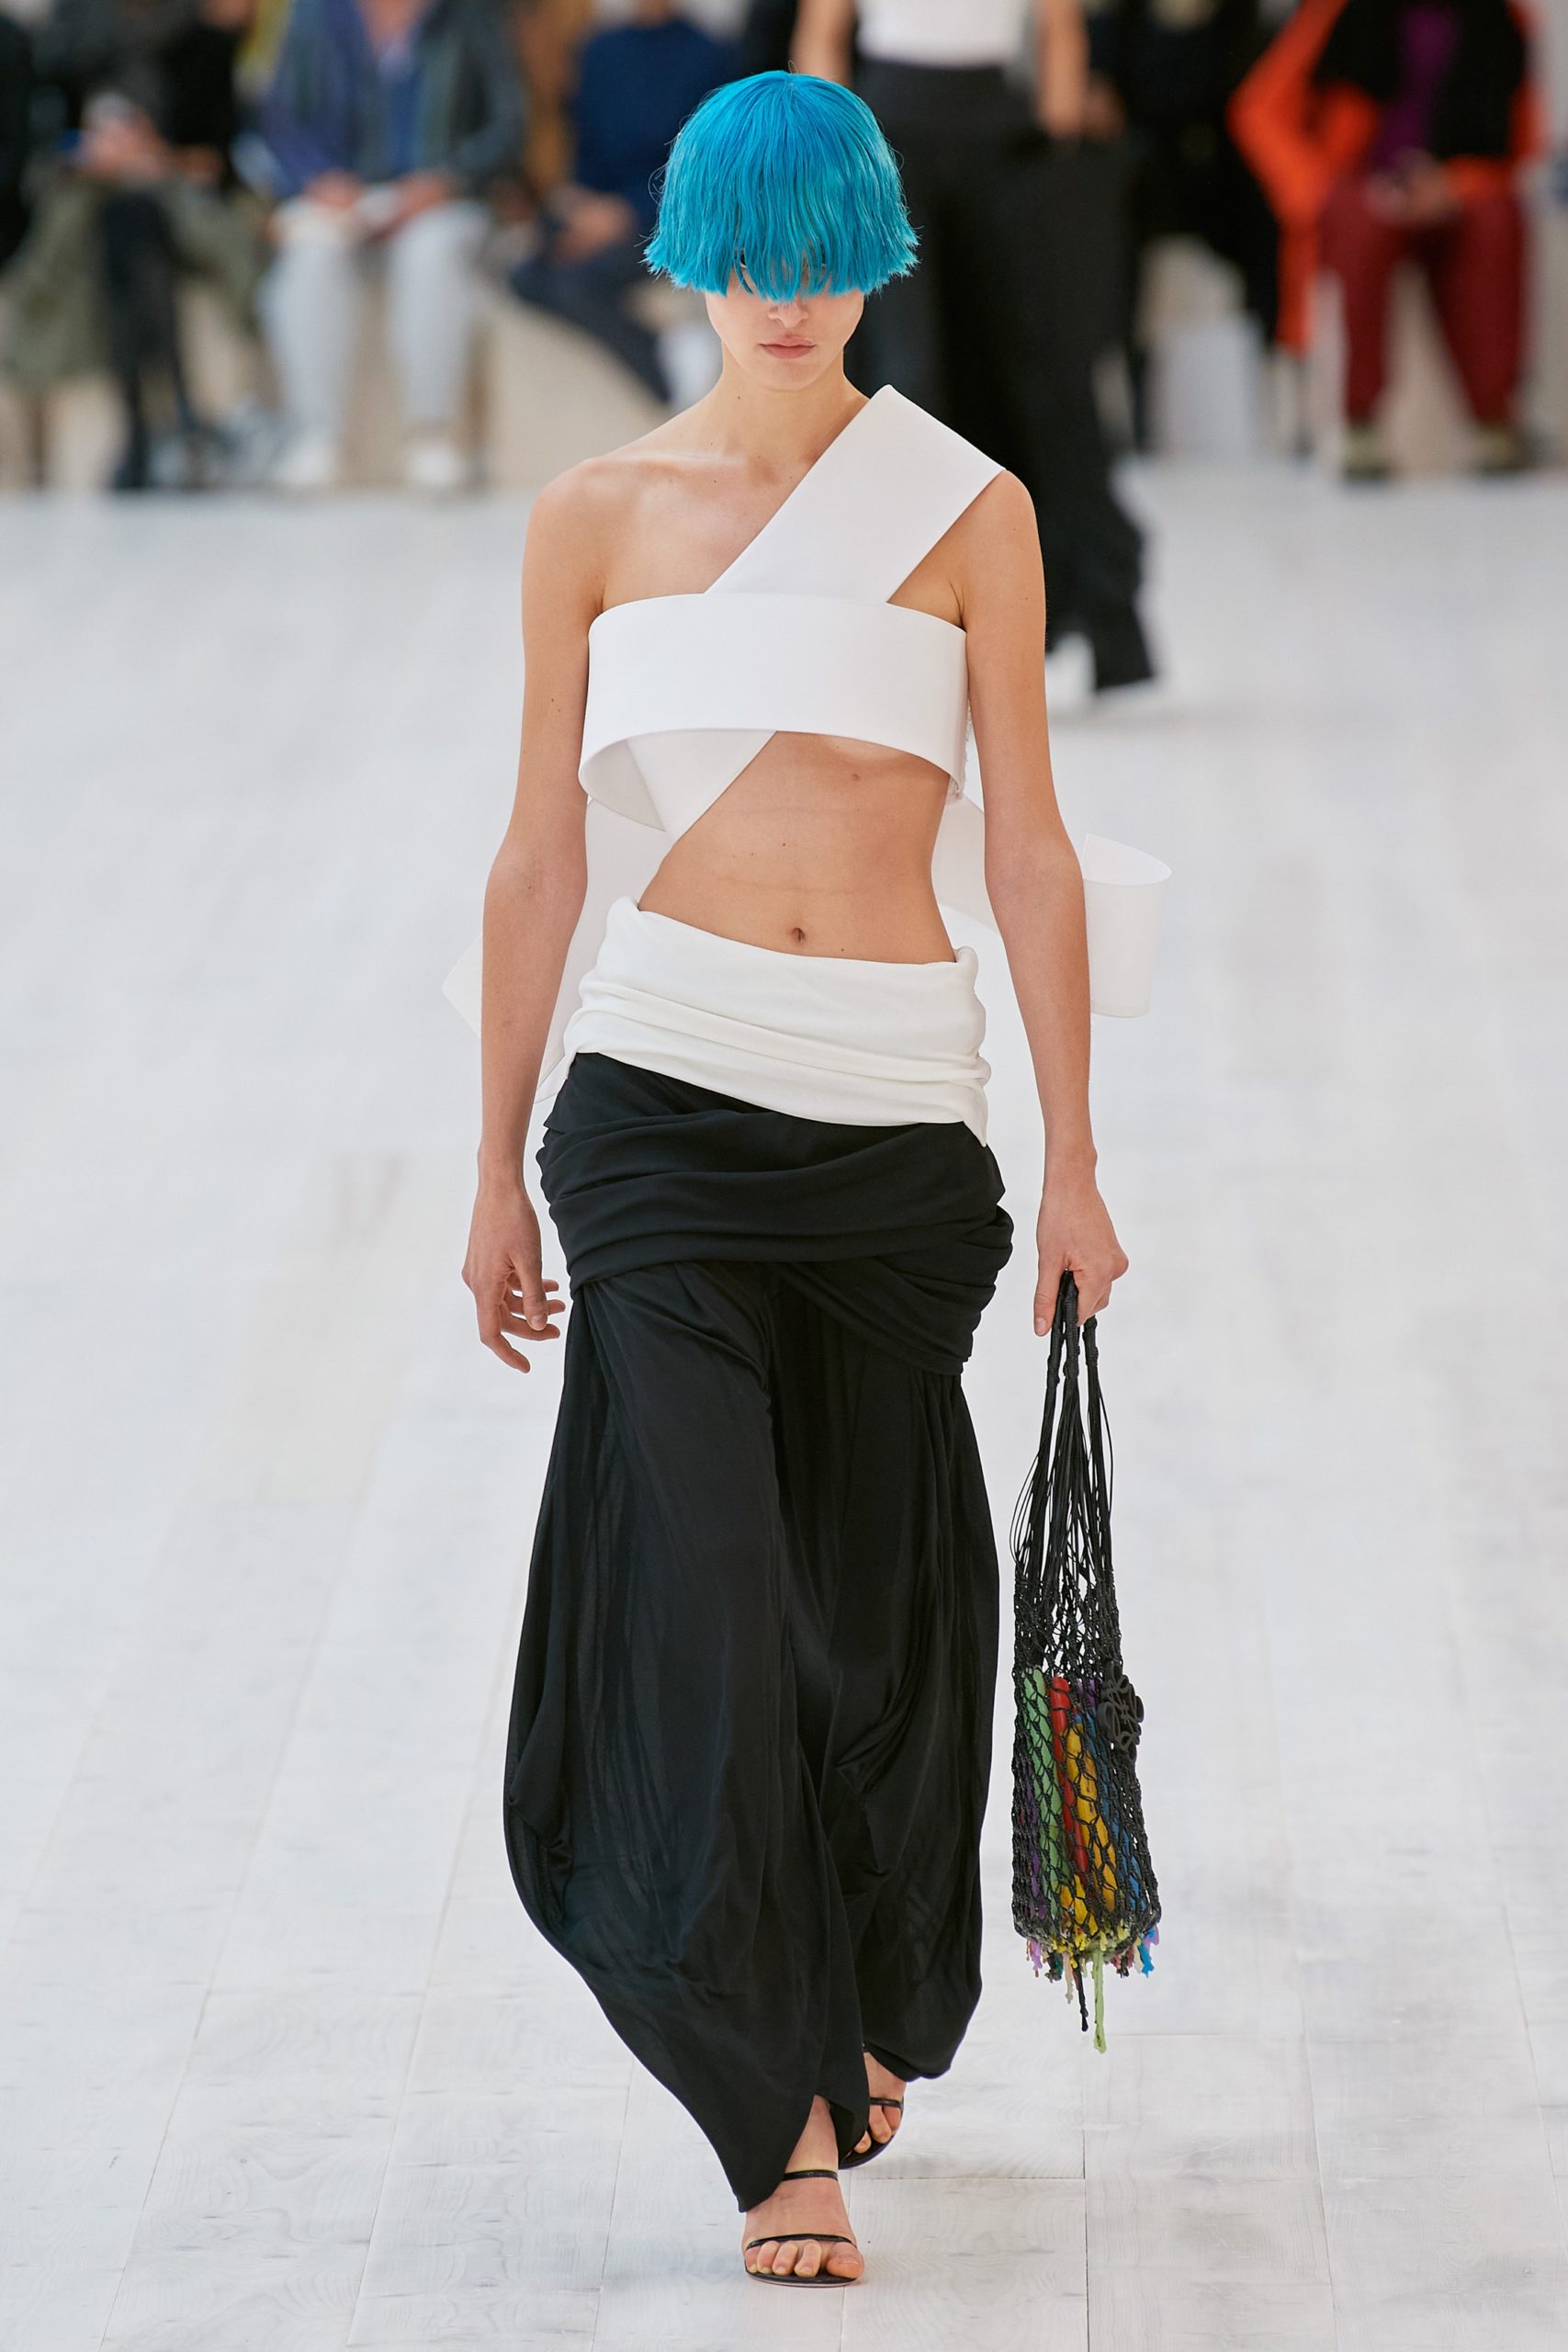 Loewe Spring 2022 Ready-to-Wear Collection